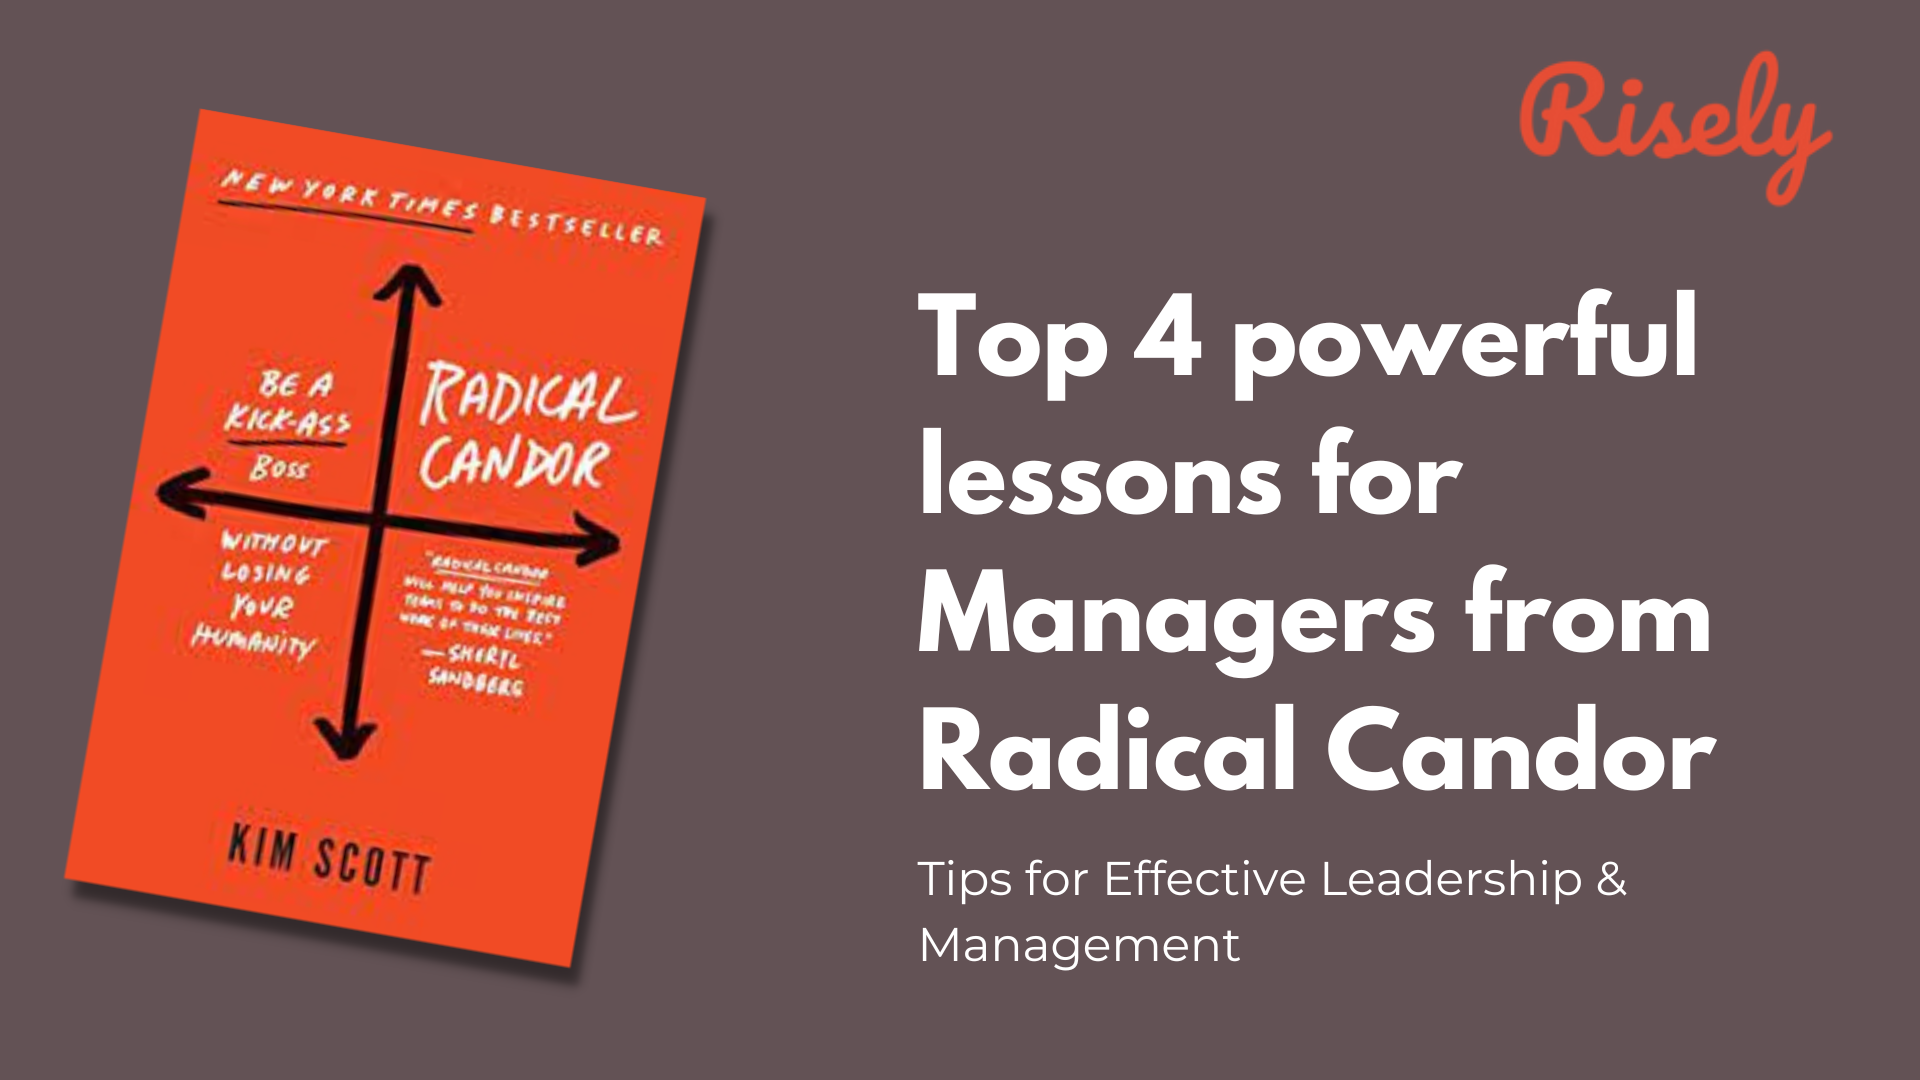 Top 4 powerful lessons for Managers from Radical Candor - Risely